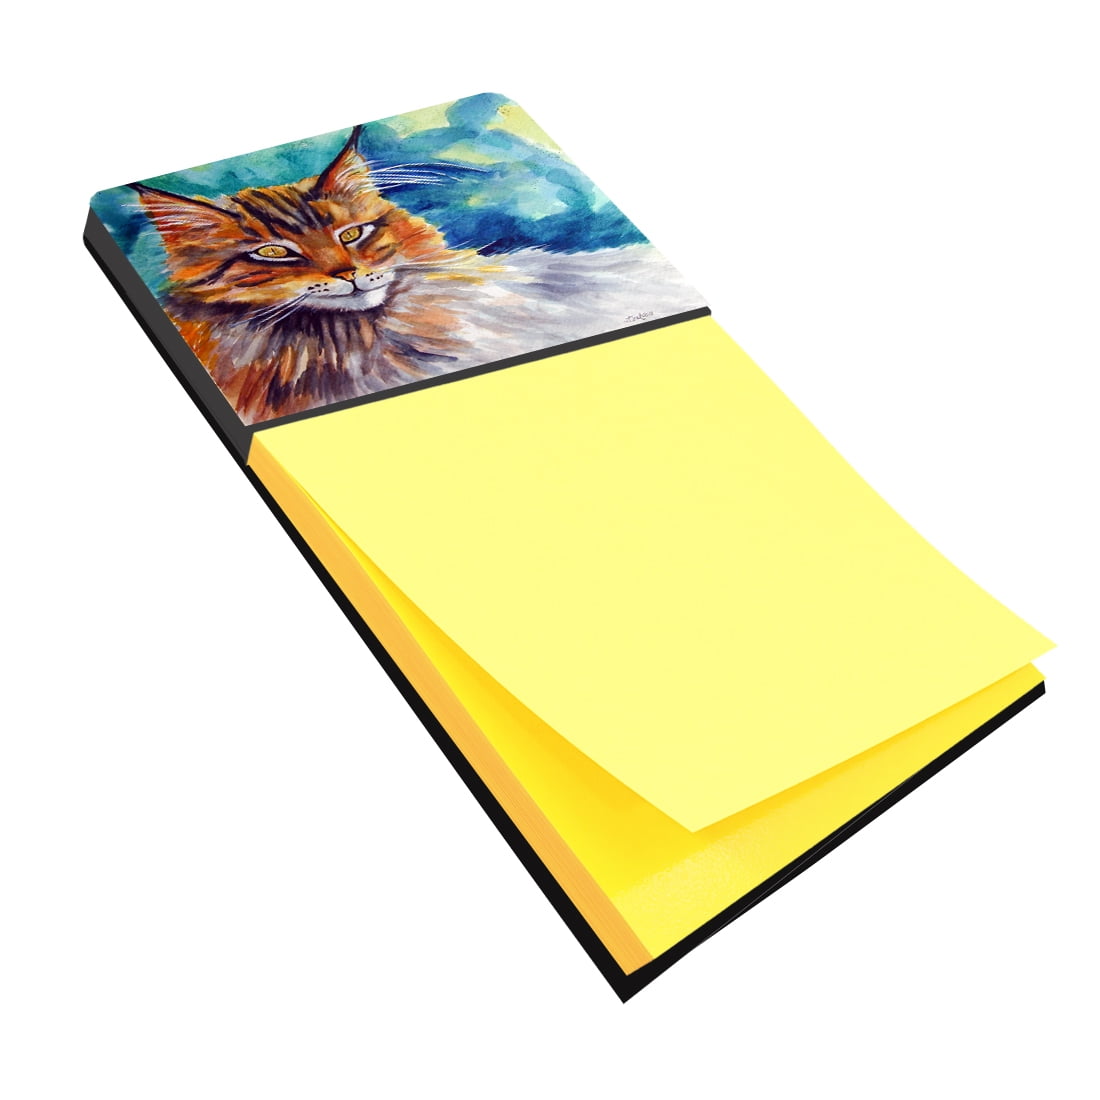 7421sn Maine Coon Cat Watching You Sticky Note Holder